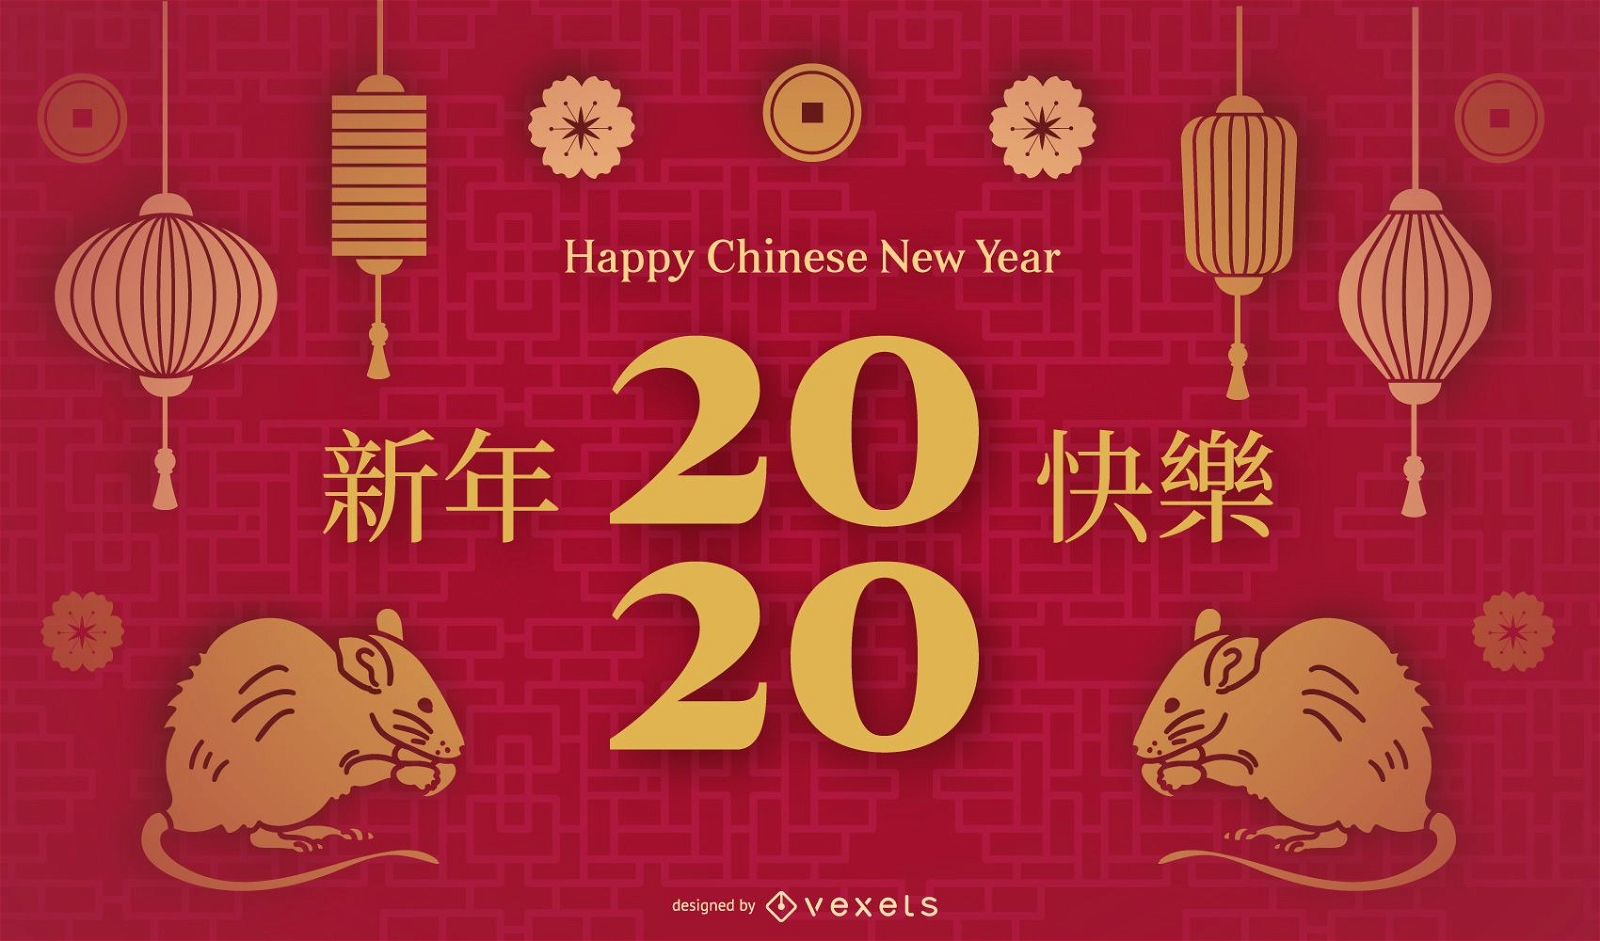 Chinese new year slide template